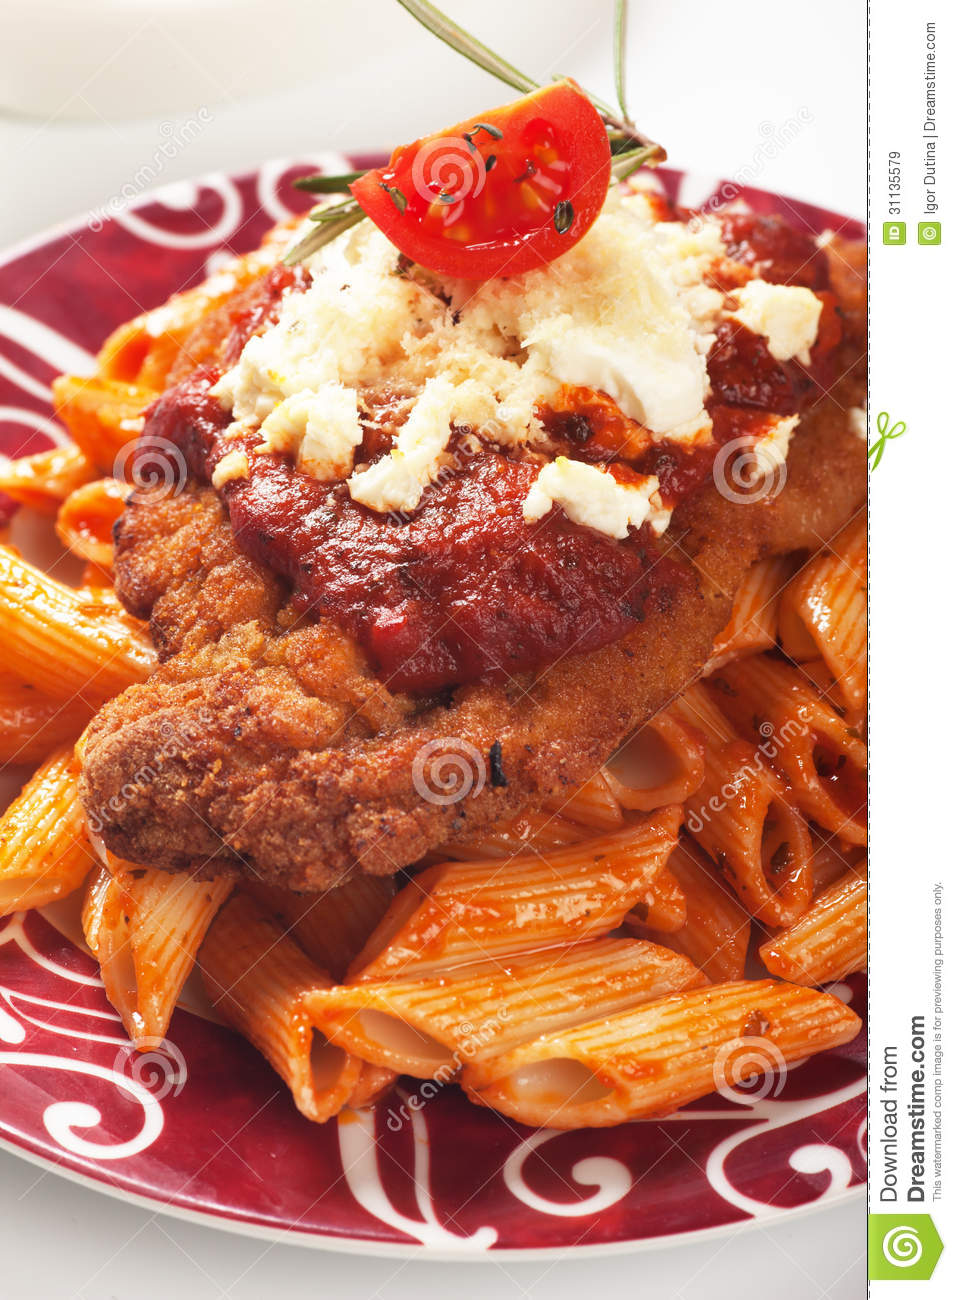 Chicken Parmesan Breaded Chicken Steak With Tomato Sauce And Macaroni